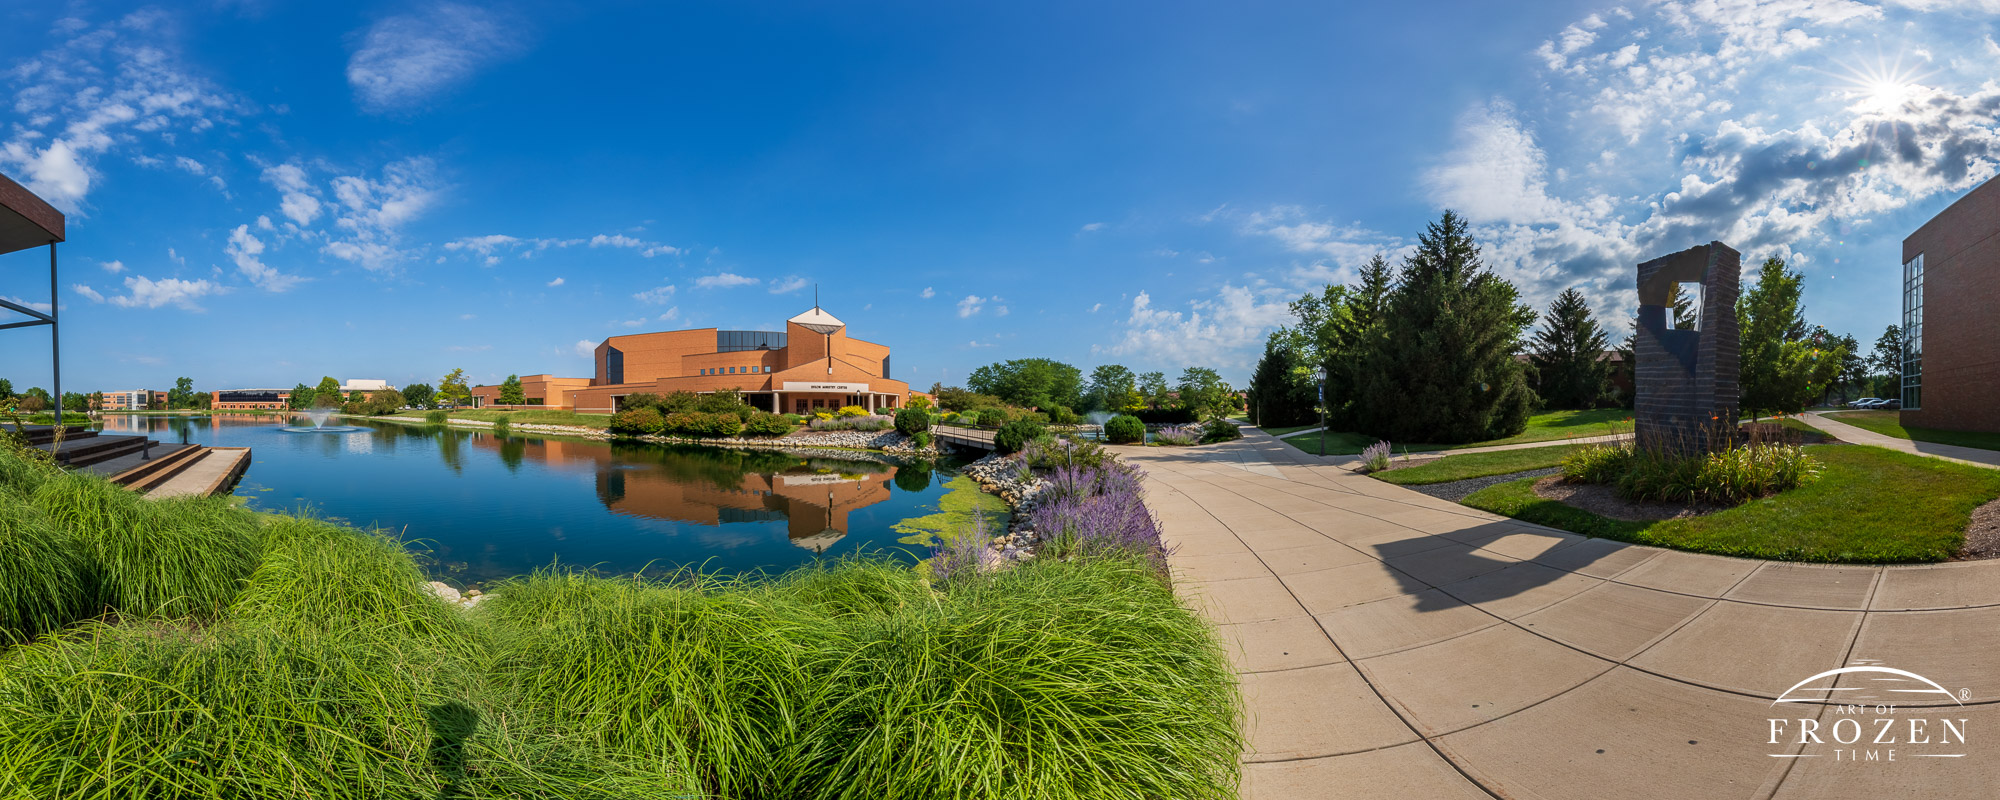 A small Ohio college with architectural gardens and fountains reside under perfect skies